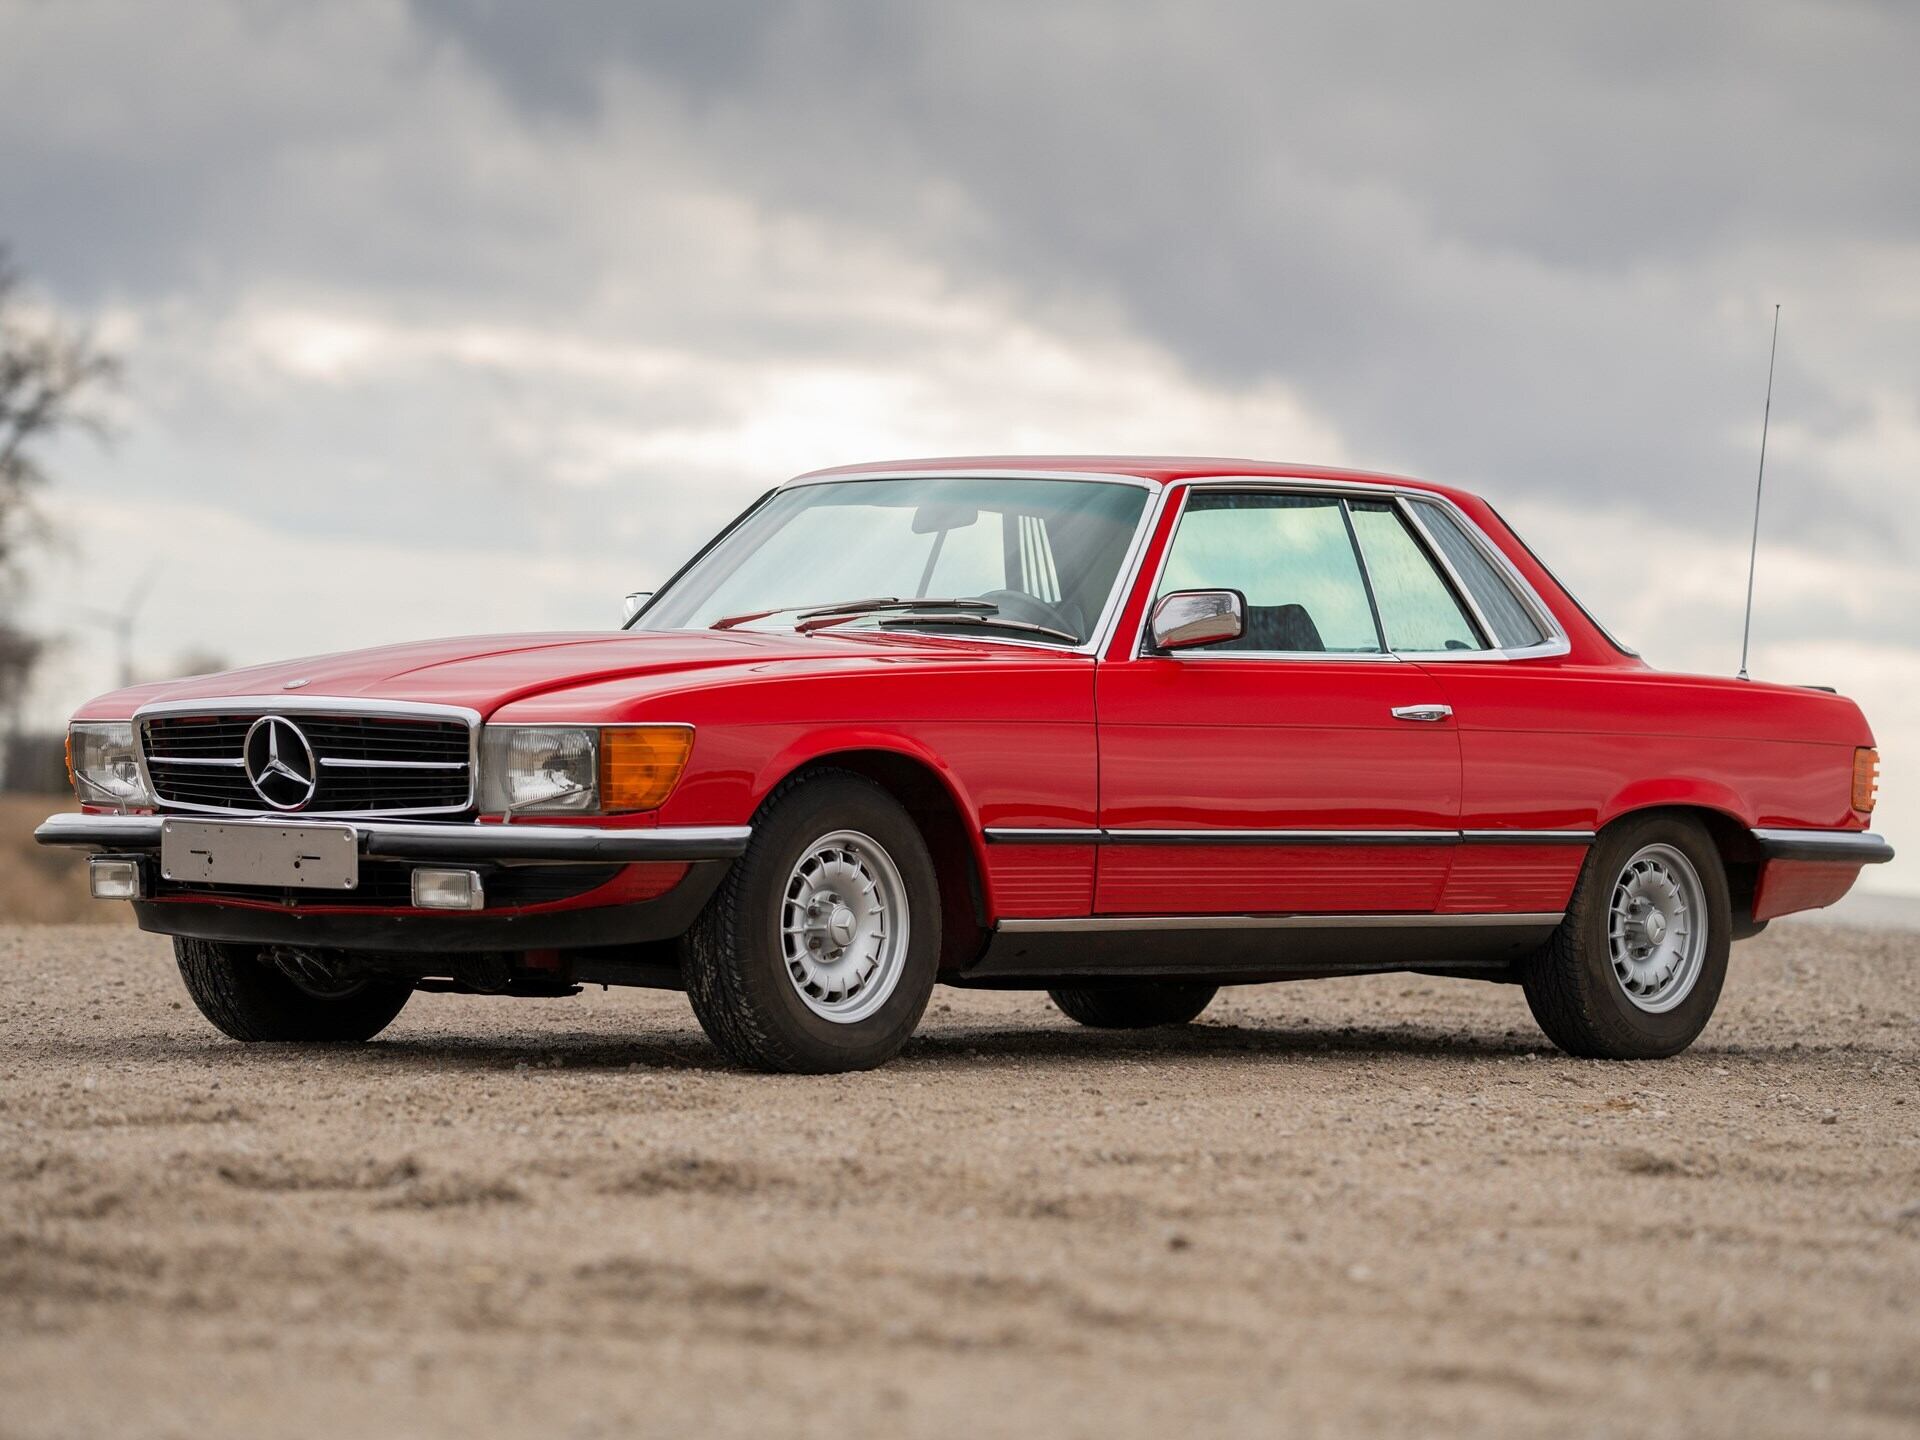 Maradona's 450SLC Mercedes up for auction with Bonhams on the 2nd February 2023.